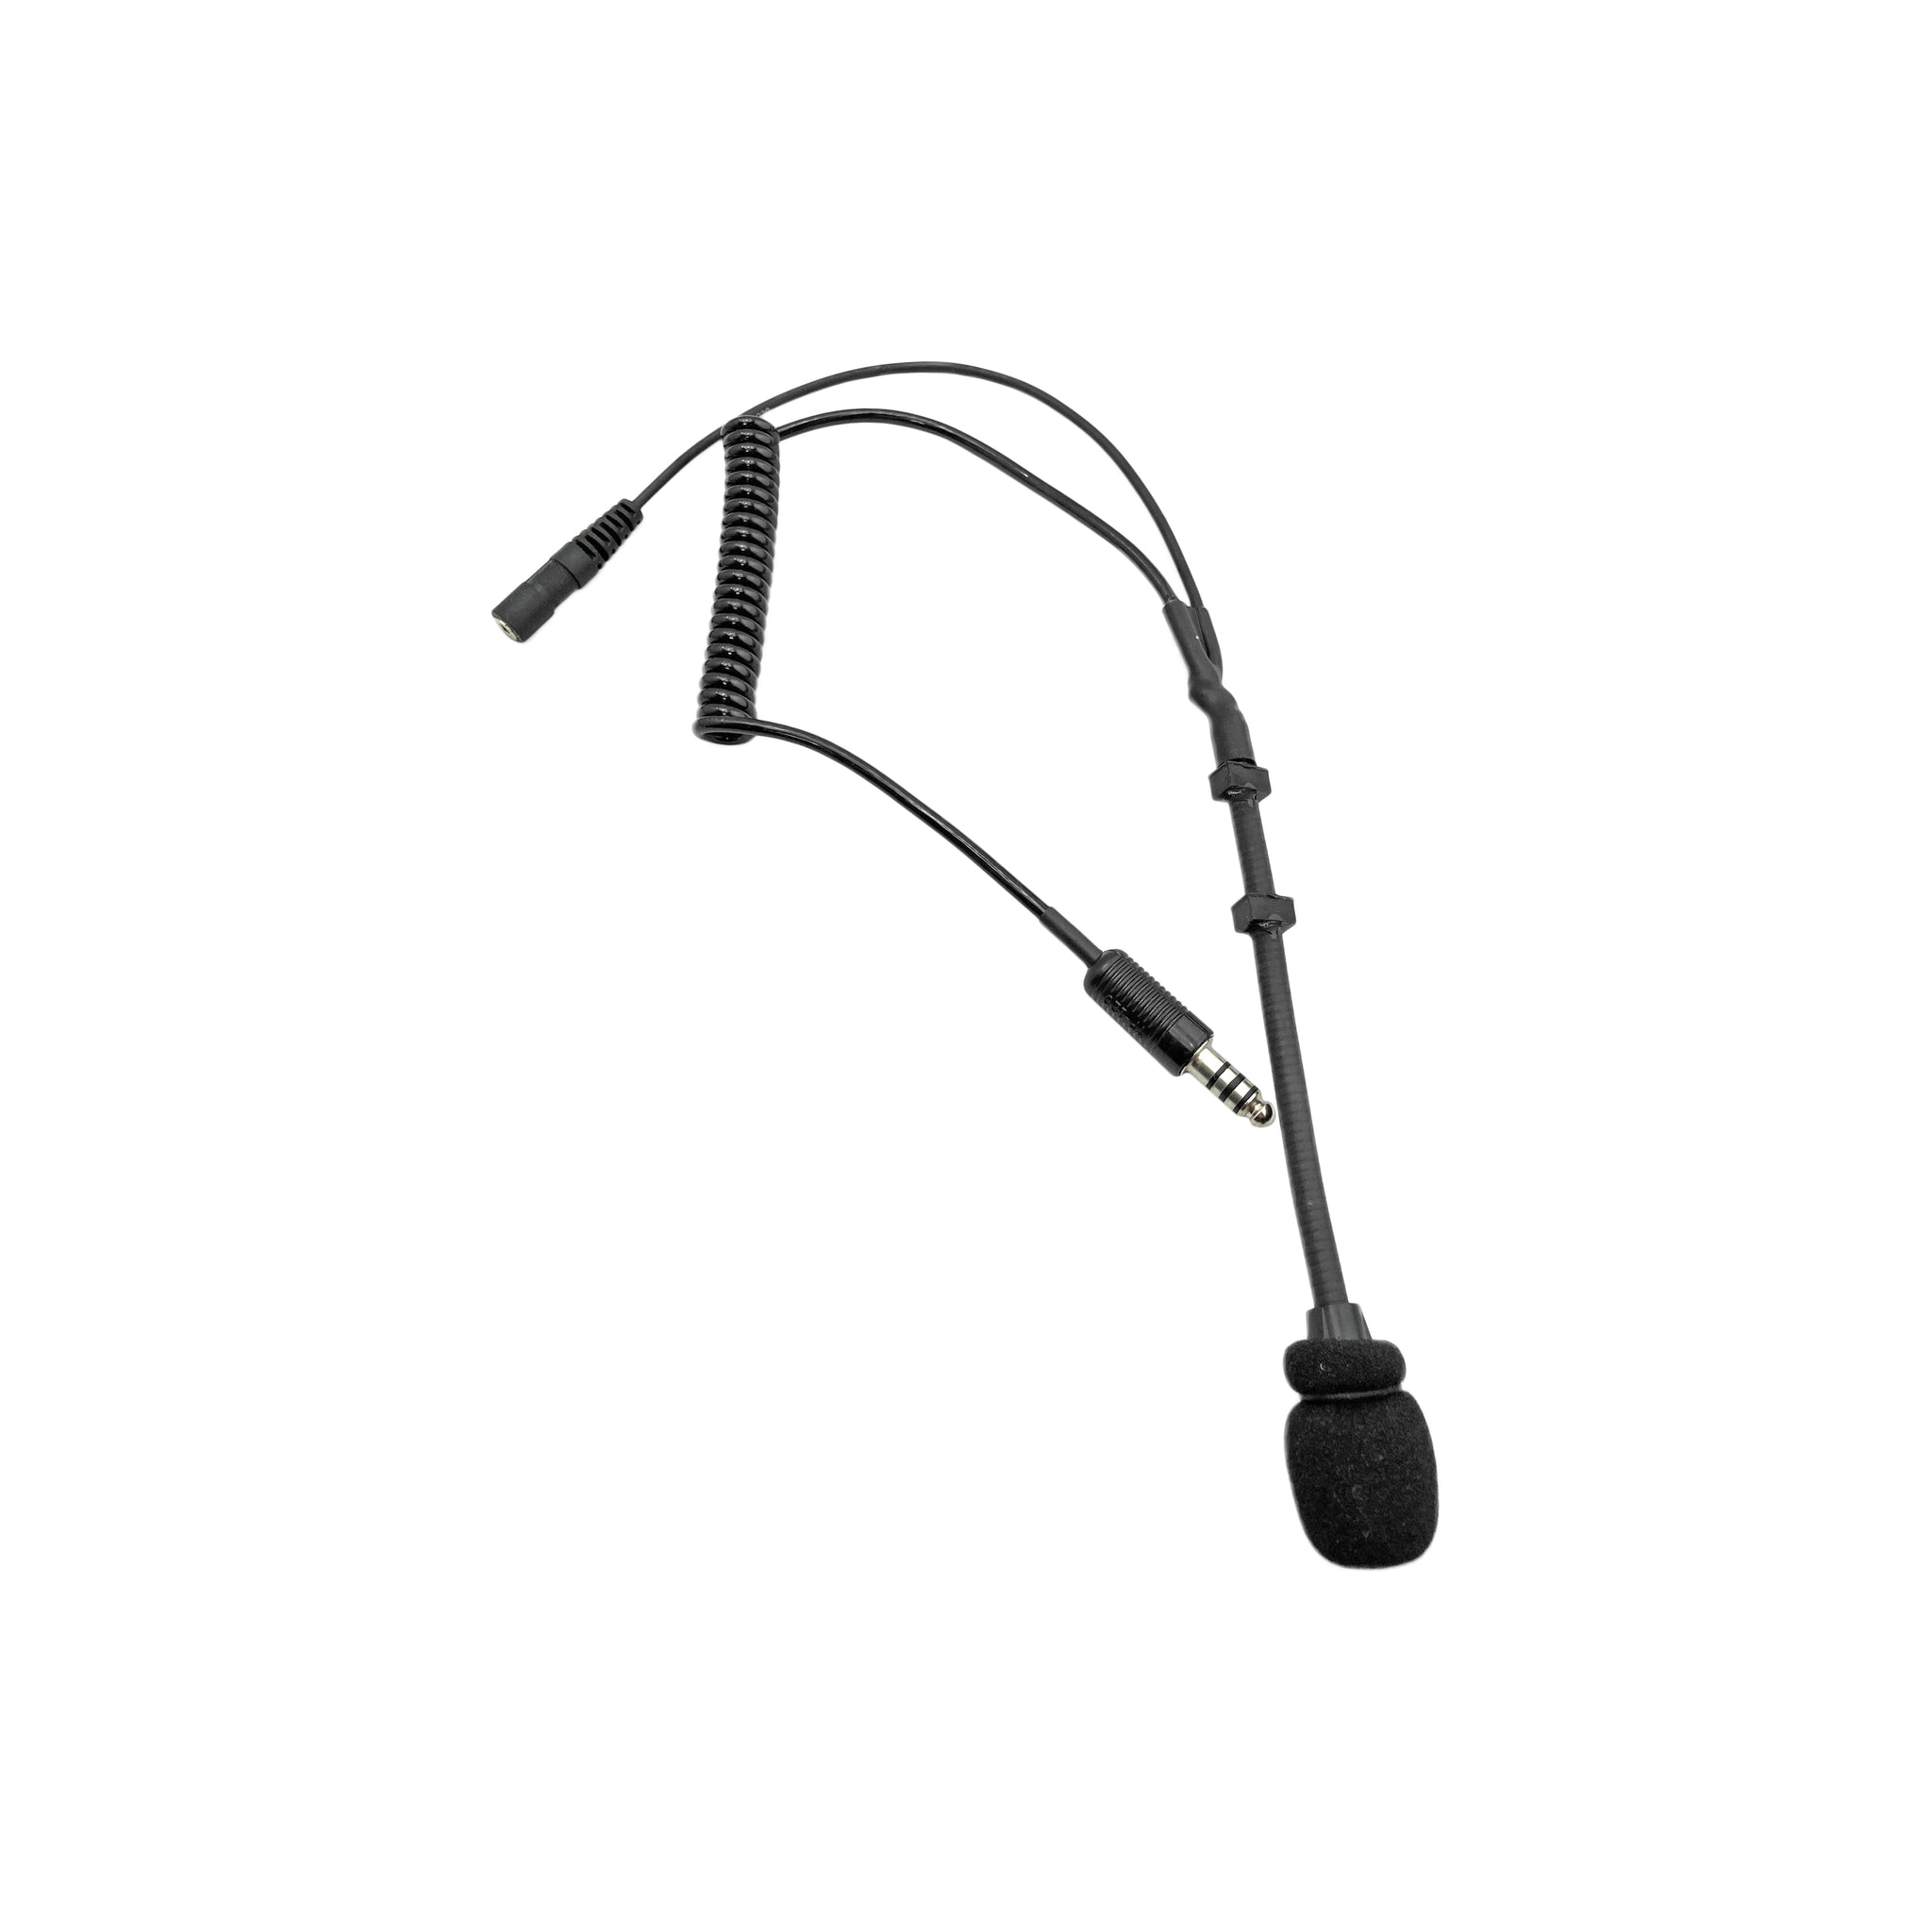 SCHUBERTH SP1 Helmet Earbud Kits (Boom Style mic and IMSA connection)